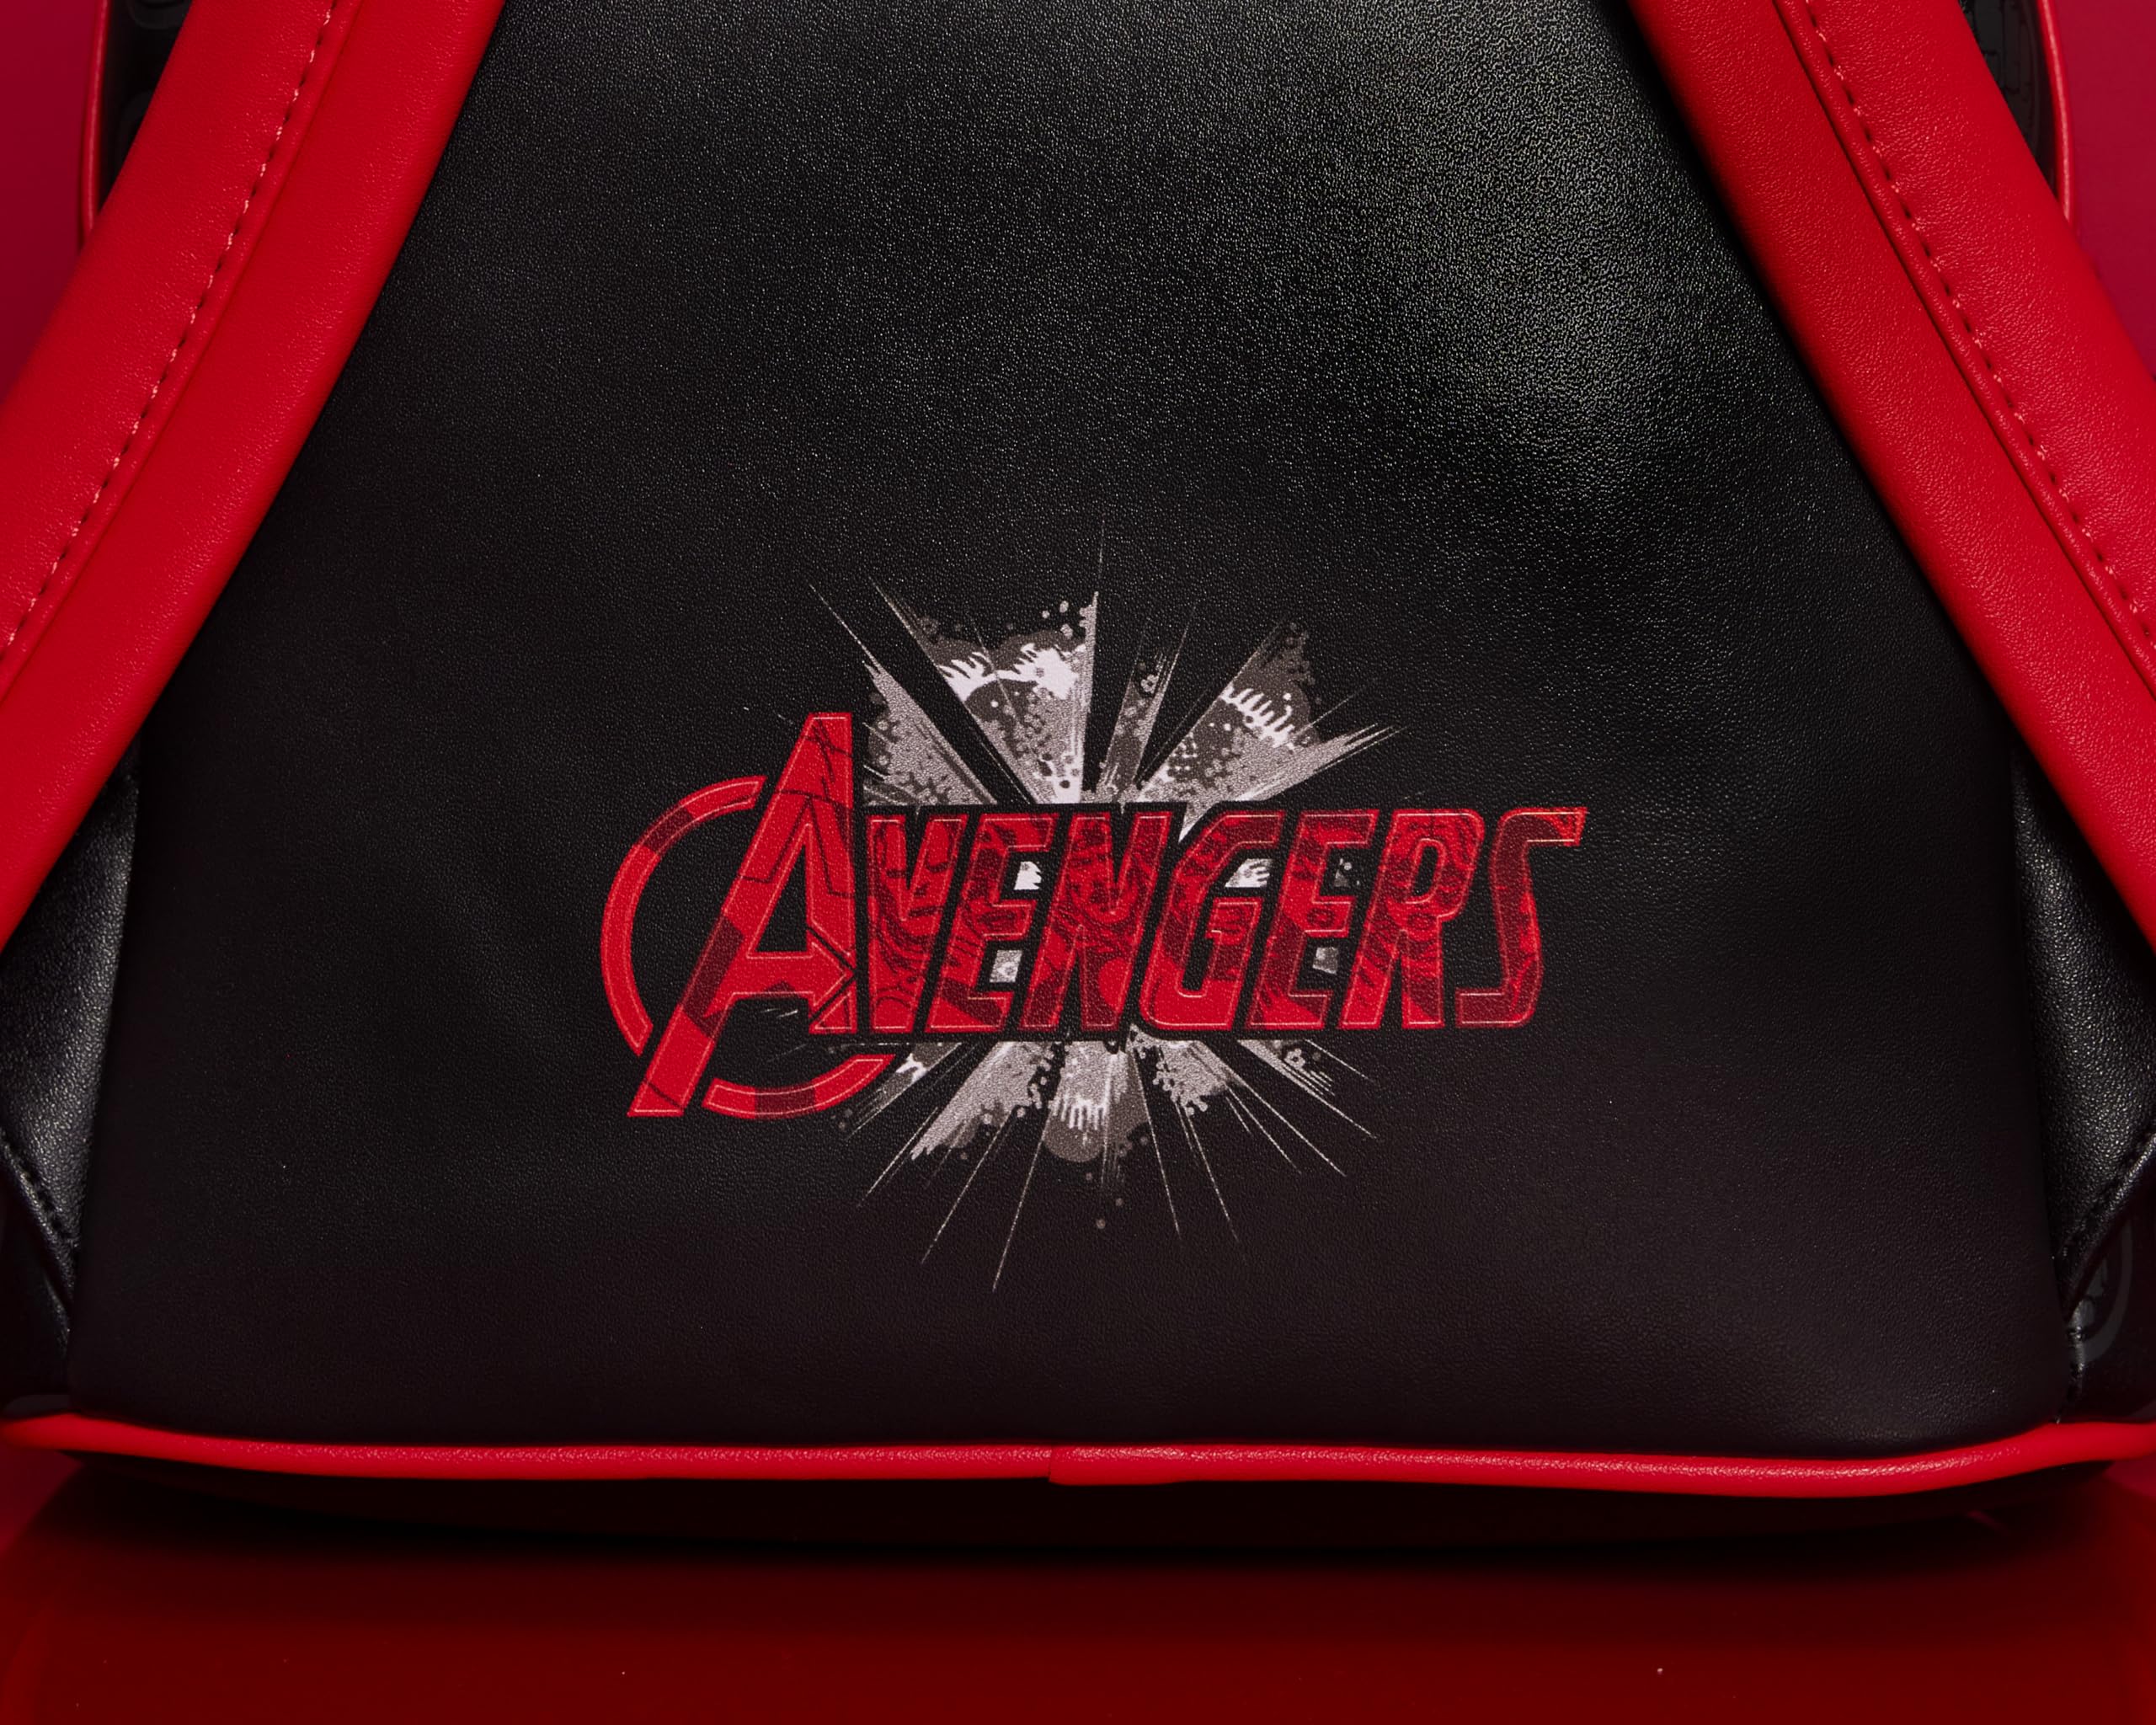 Loungefly Avengers 60th Anniversary Glow in The Dark Mini-Backpack, Amazon Exclusive